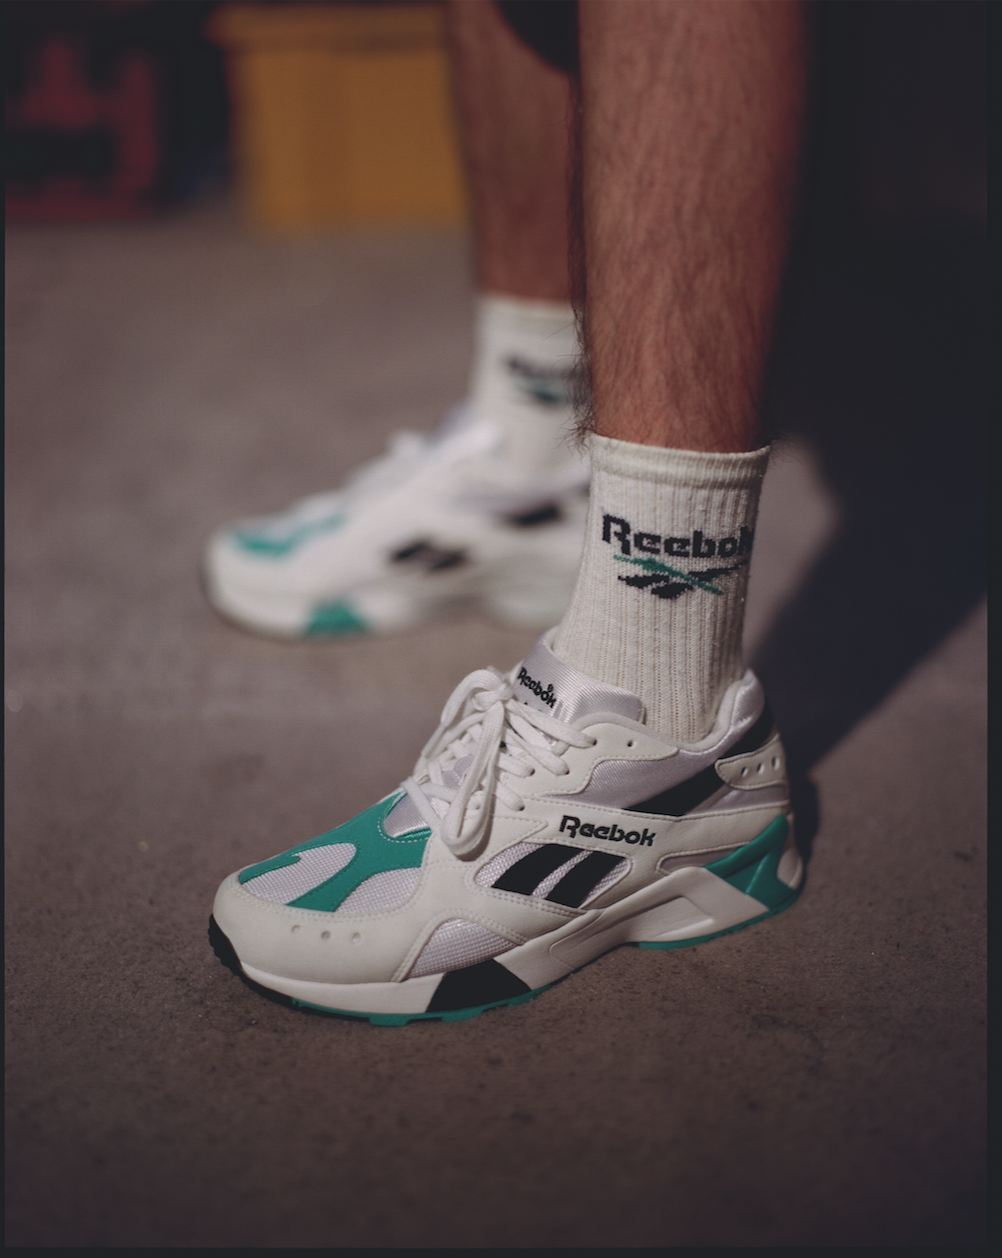 Reebok Classic launches campaign that the 90s spirit — DSTNGR